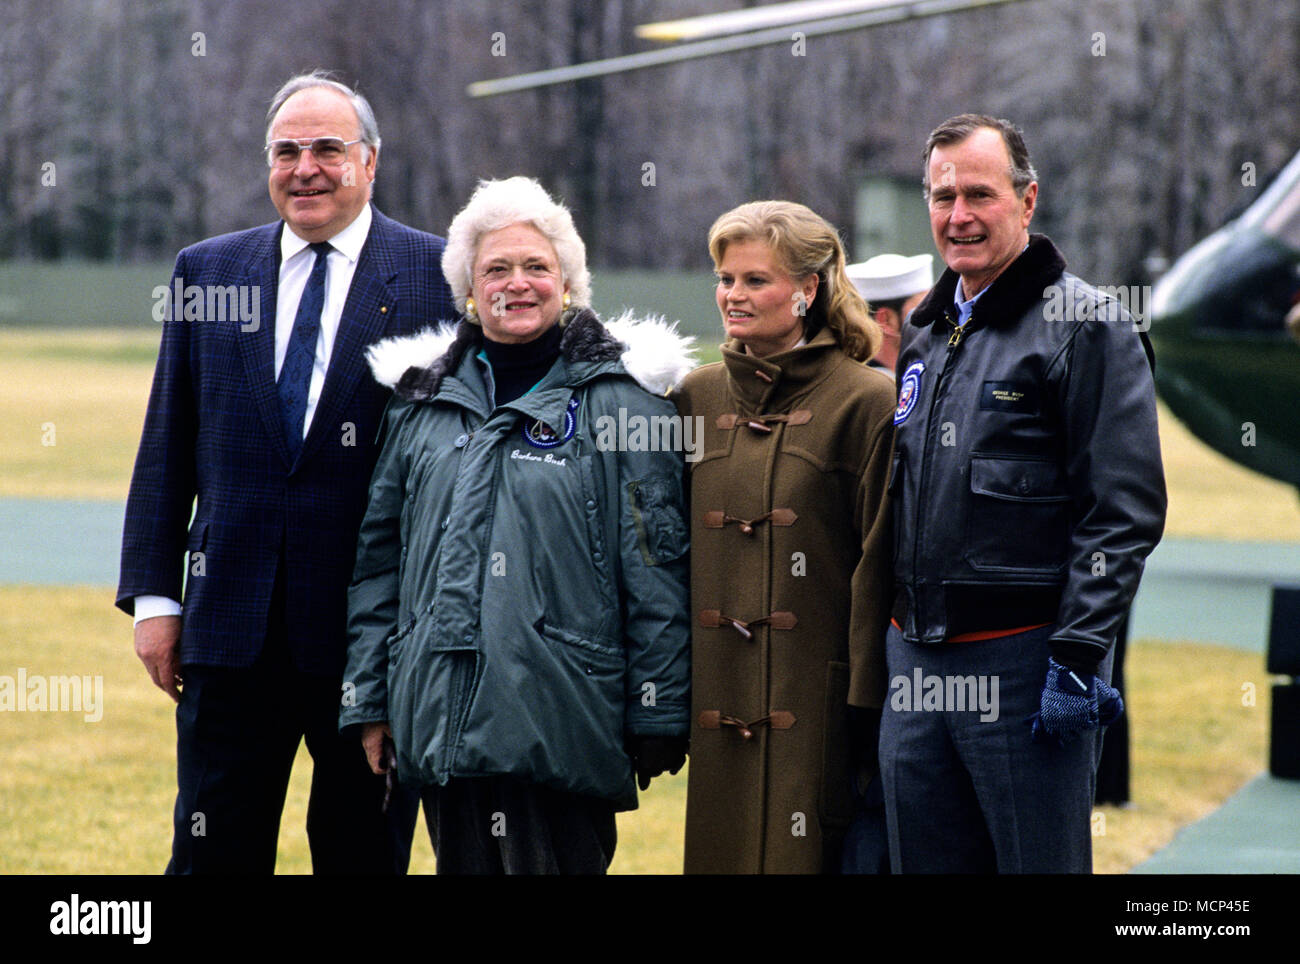 ***FILE PHOO*** BARBARA BUSH HAS PASSED AWAY (1925-2018) United States President George H.W. Bush, right, and first lady Barbara Bush, left center, welcome Chancellor Helmut Kohl of West Germany, left, and his wife, Hannelore, right center, to Camp David, the presidential retreat near Thurmont, Maryland on February 24, 1990. Credit: Ron Sachs/CNP /MediaPunch Stock Photo